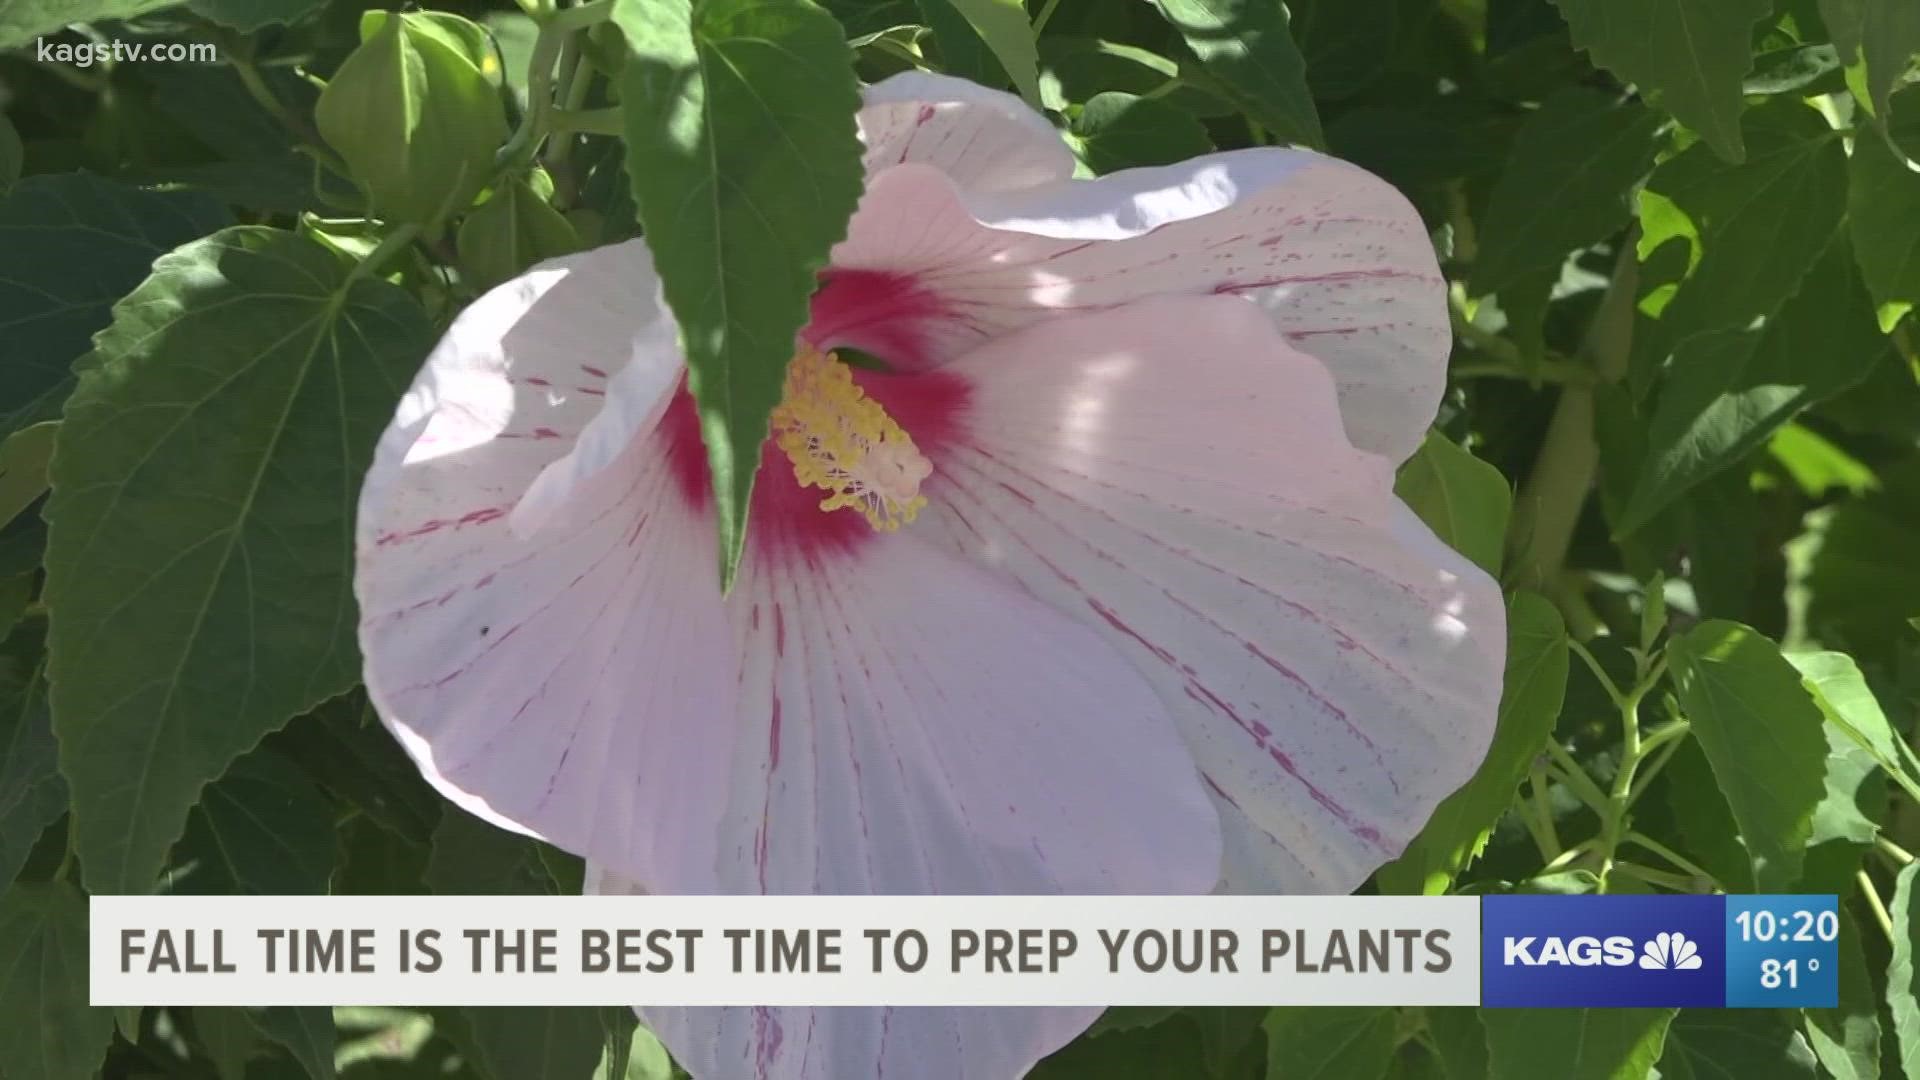 With cooler temperatures on the way, here's how you can keep your plants looking good as new